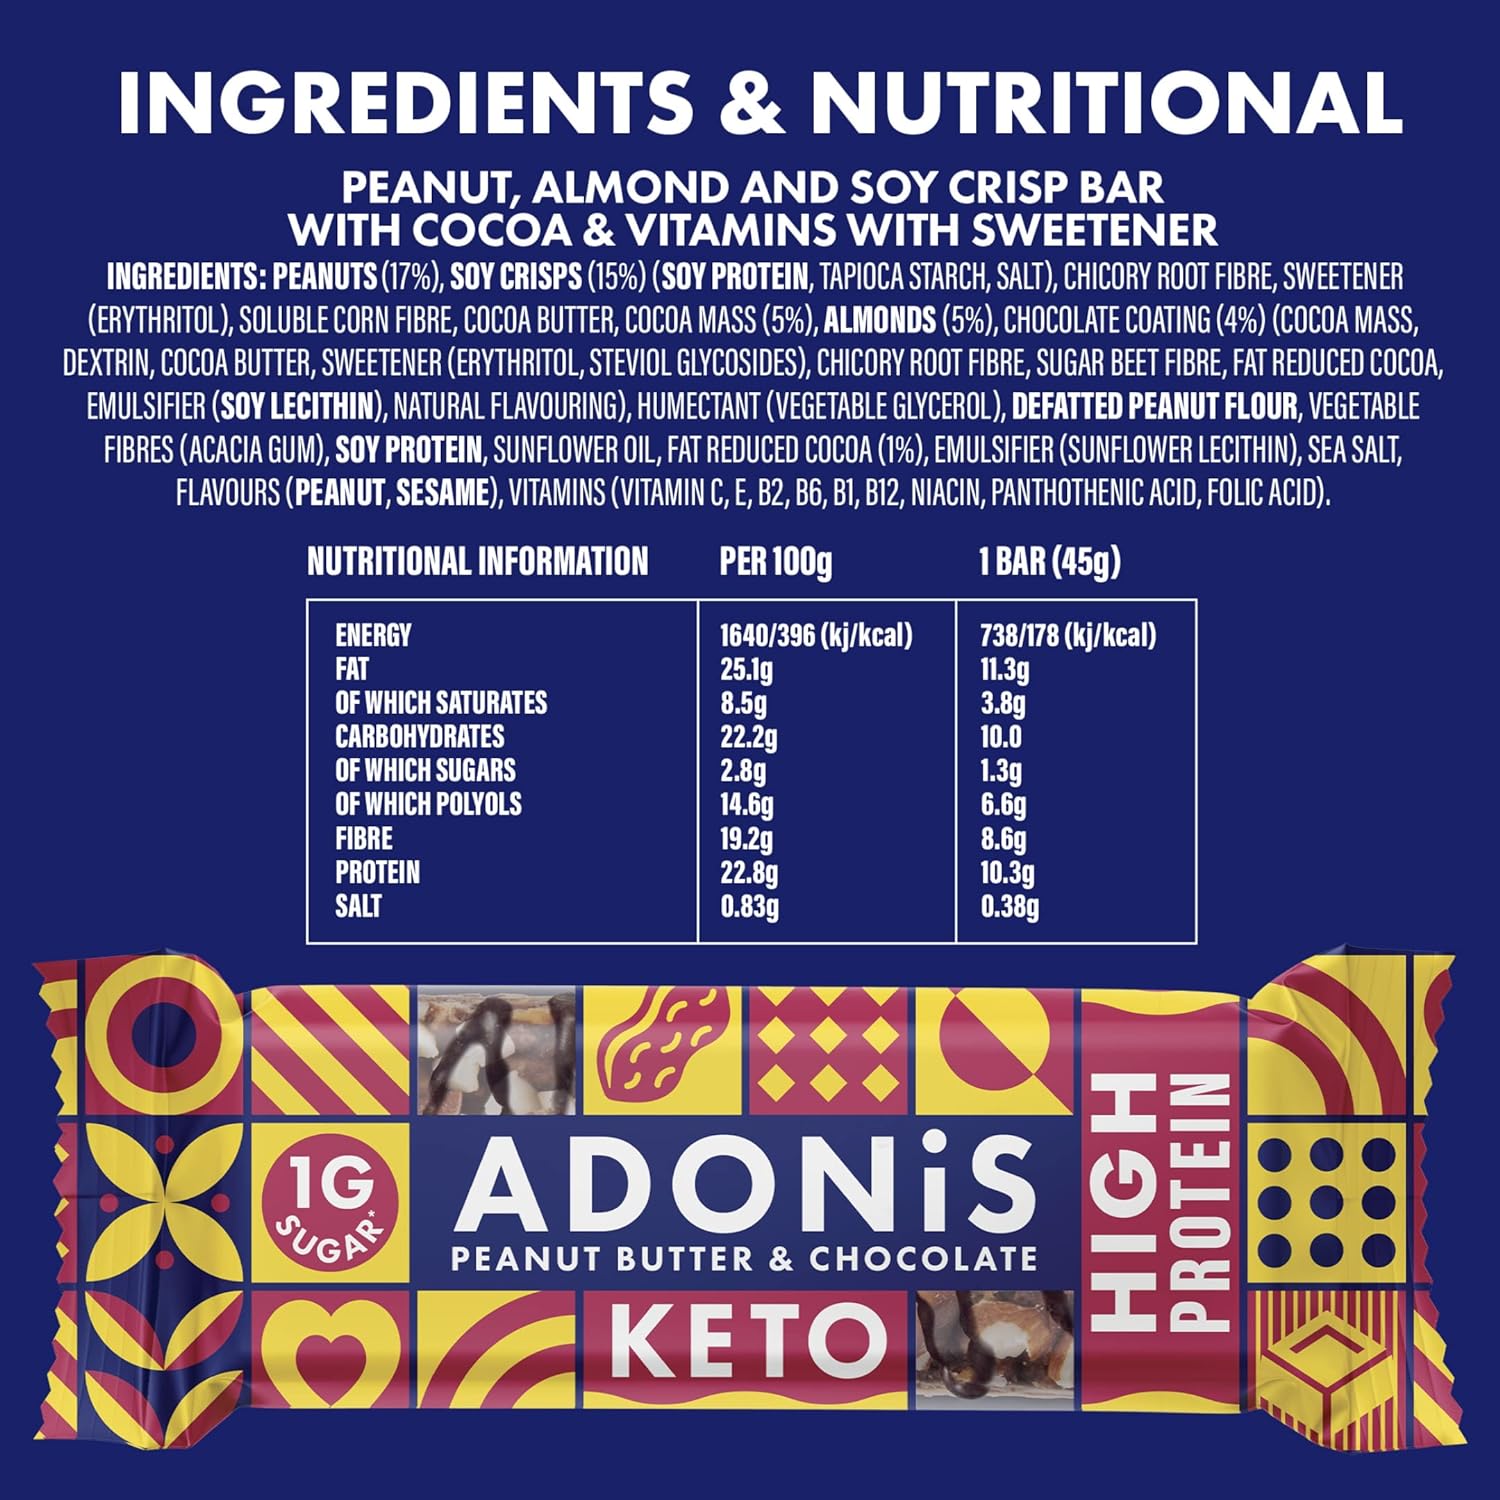 Adonis Peanut Butter & Chocolate High Protein Keto Bars Review